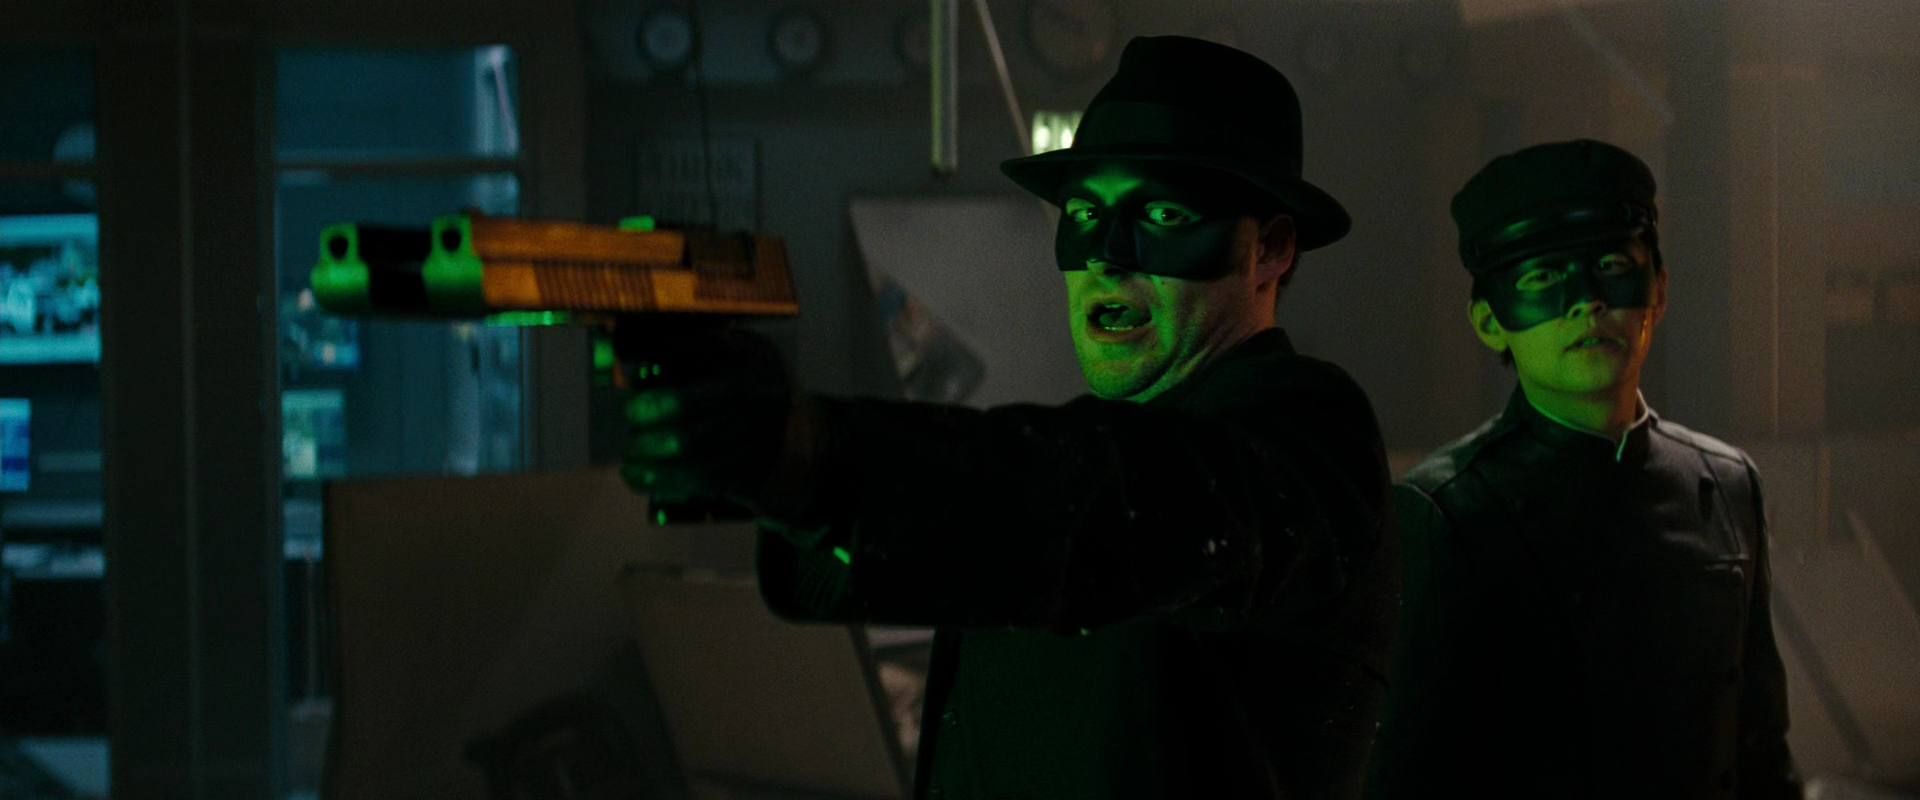 The Green Hornet (Seth Rogen) and Kato (Jay Chou) draw on Benjamin Chudnofsky (Christoph Waltz) in The Green Hornet (2011), Sony Pictures